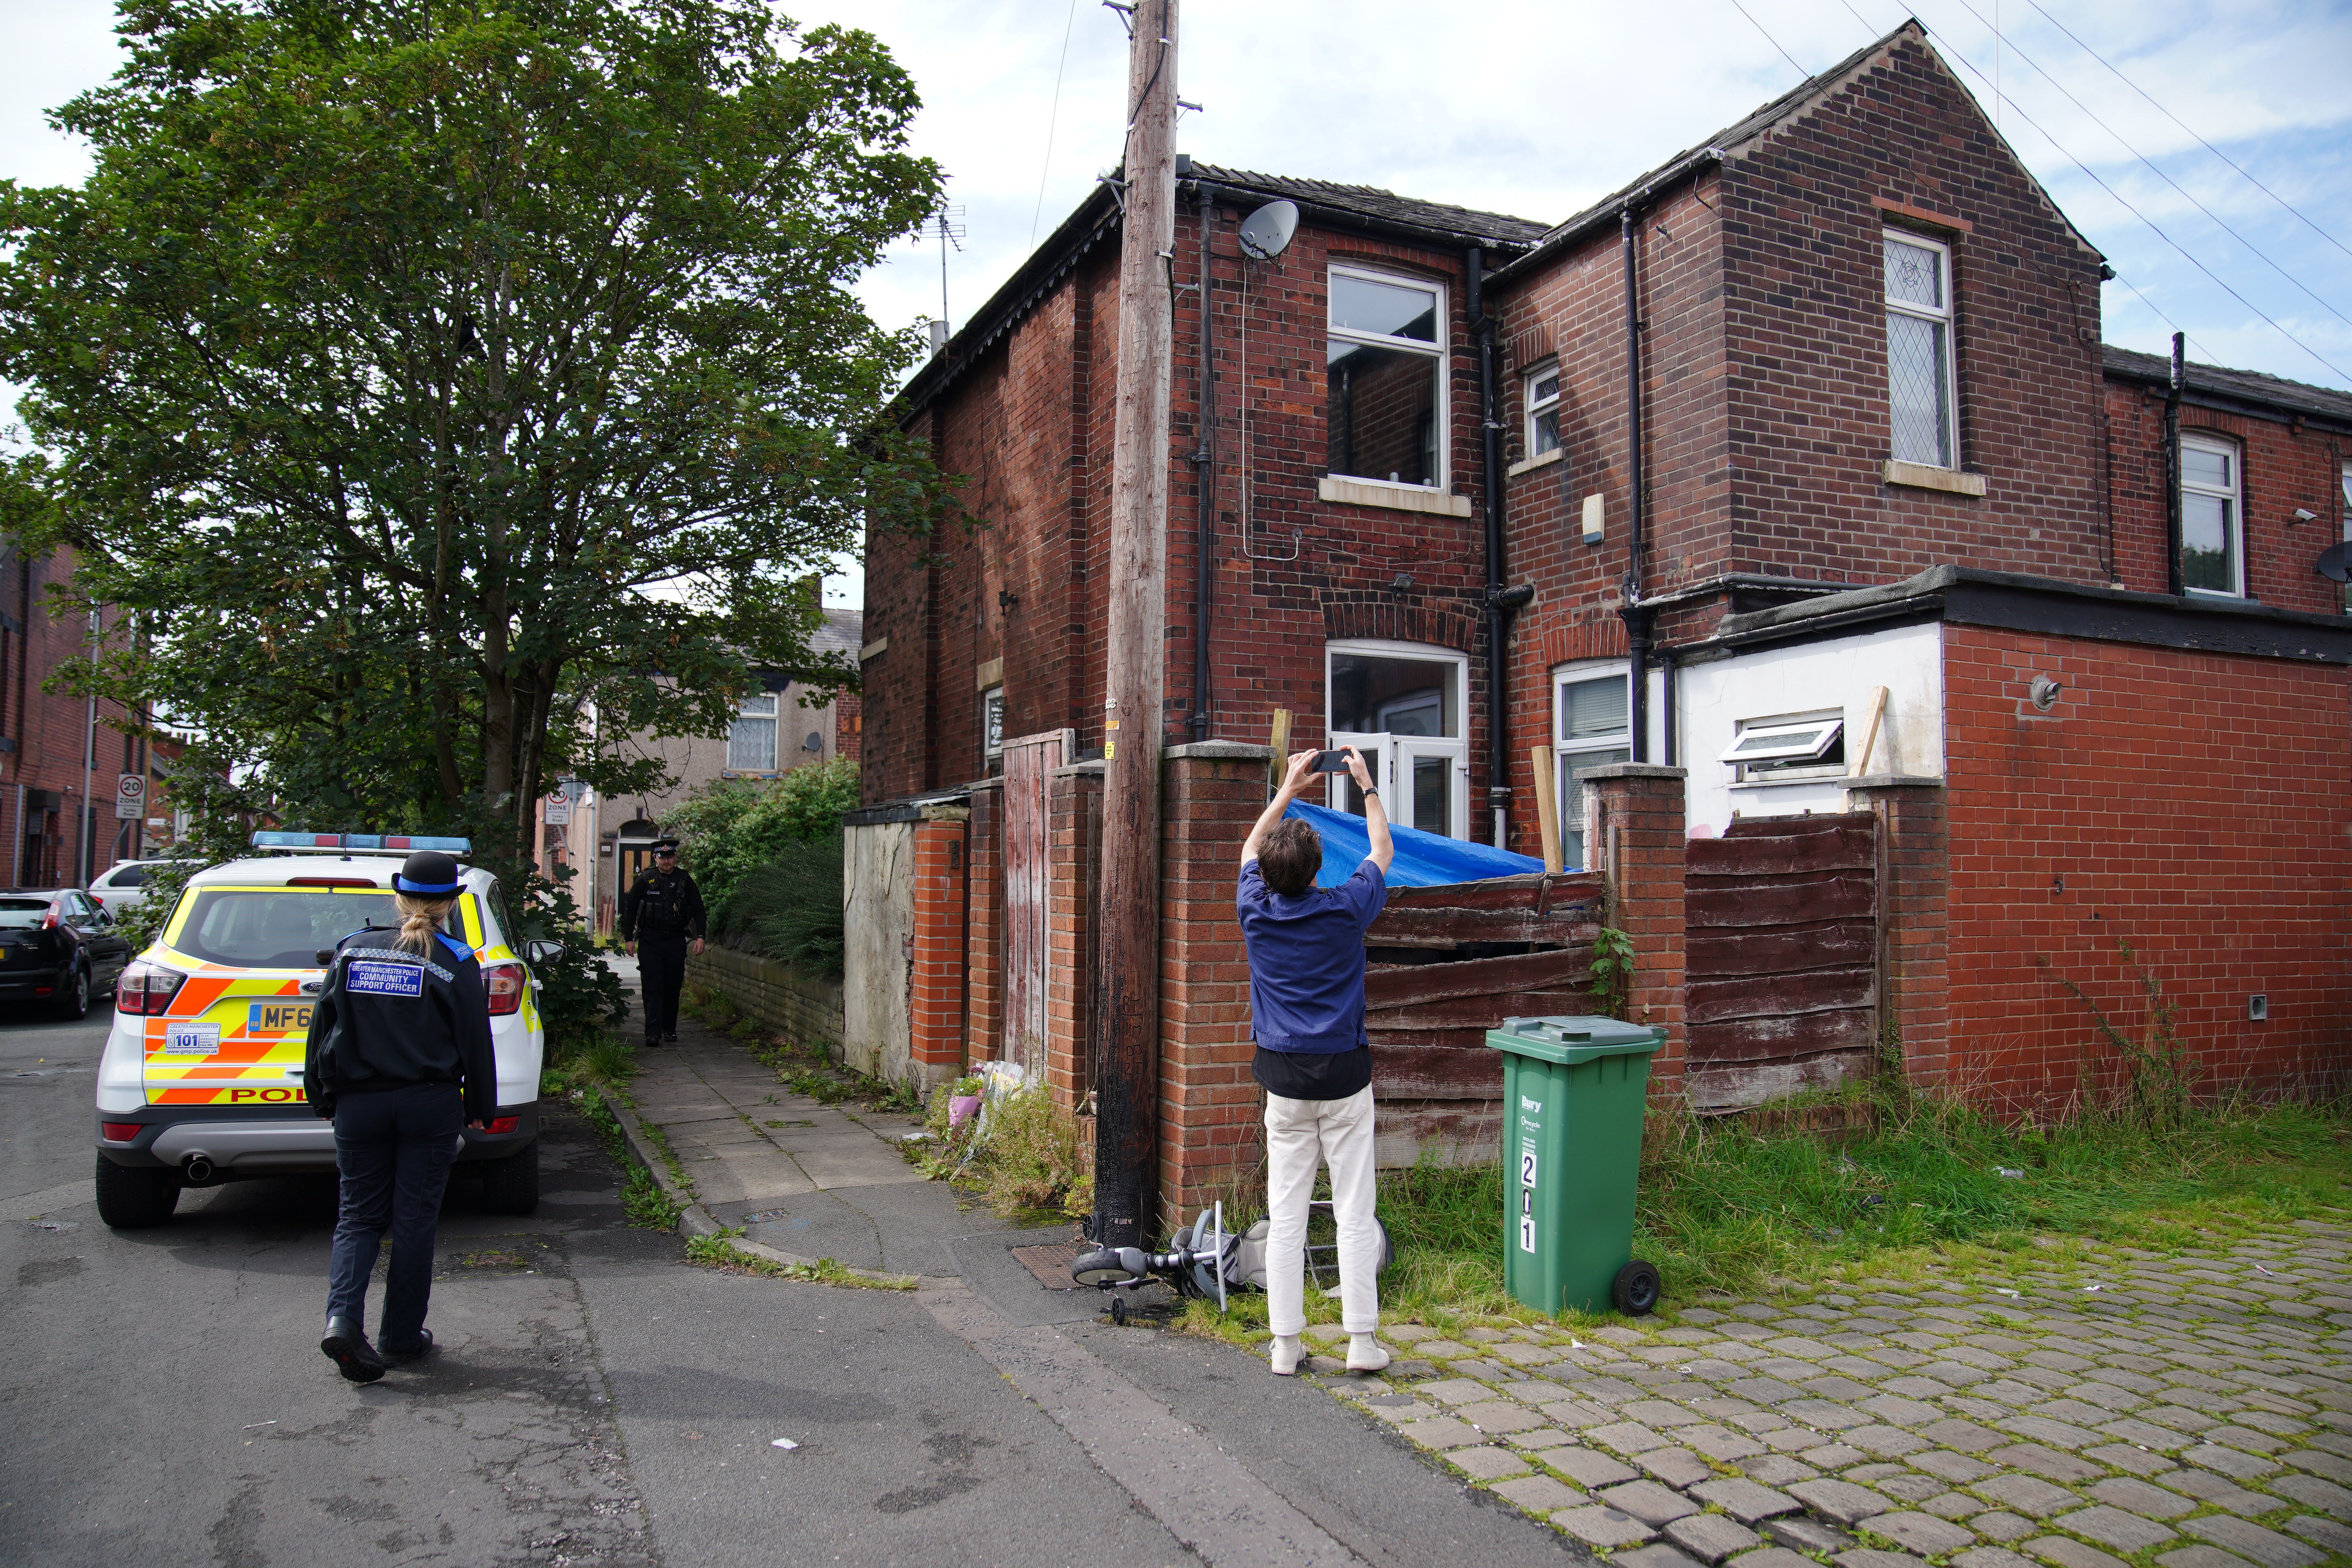 Police officers outside his property on Ainsworth Road